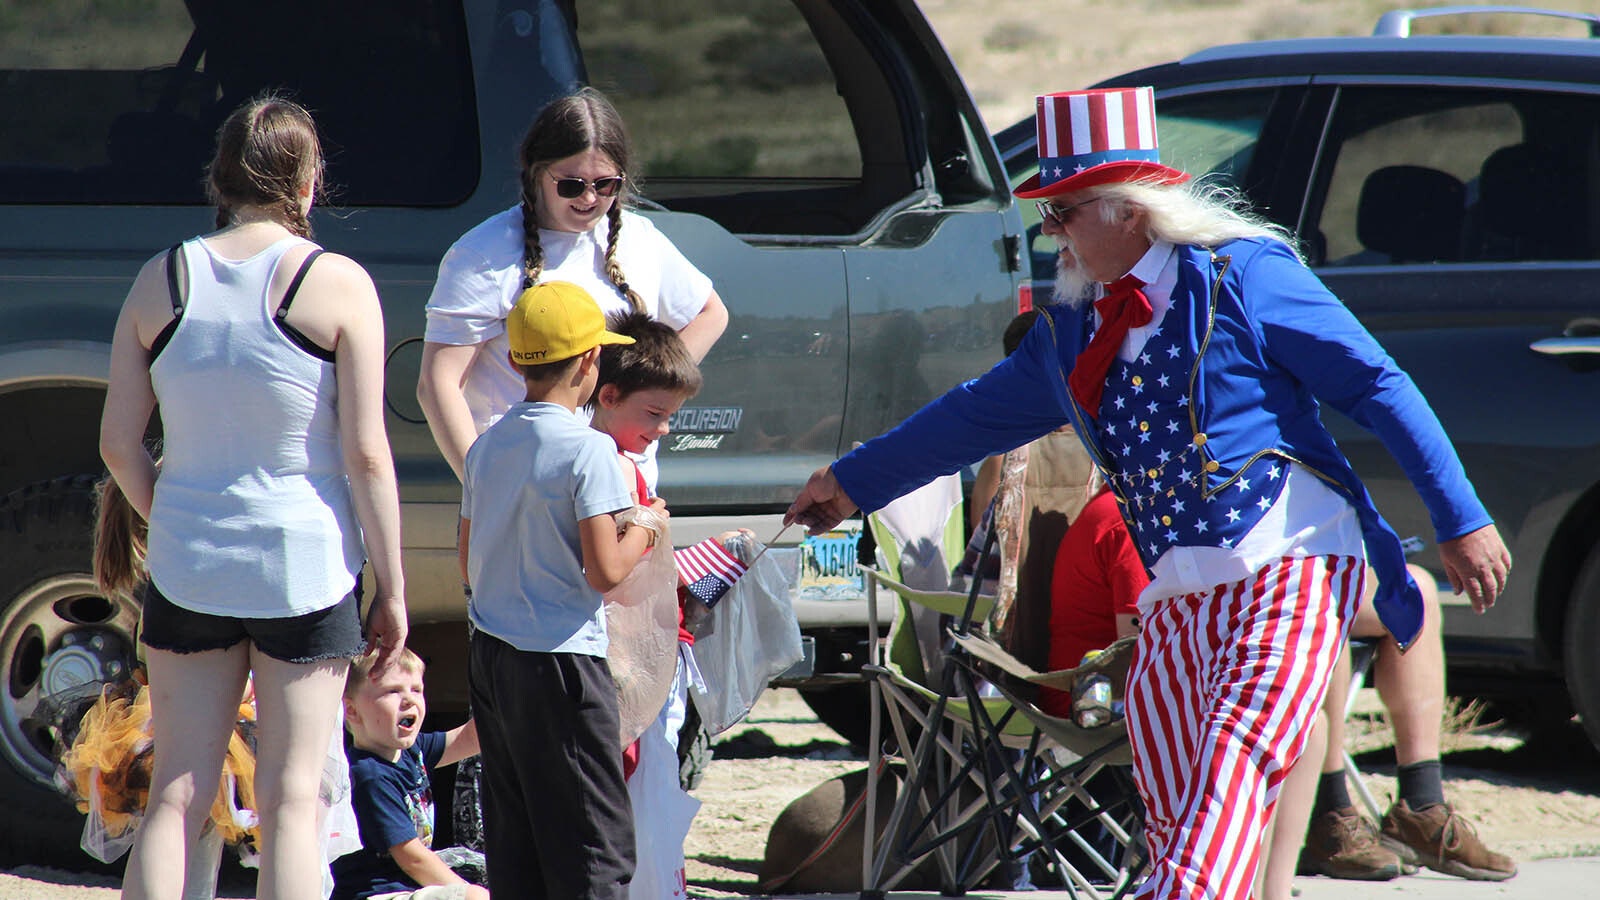 Uncle Same hands out American flags to kids along the parade route.